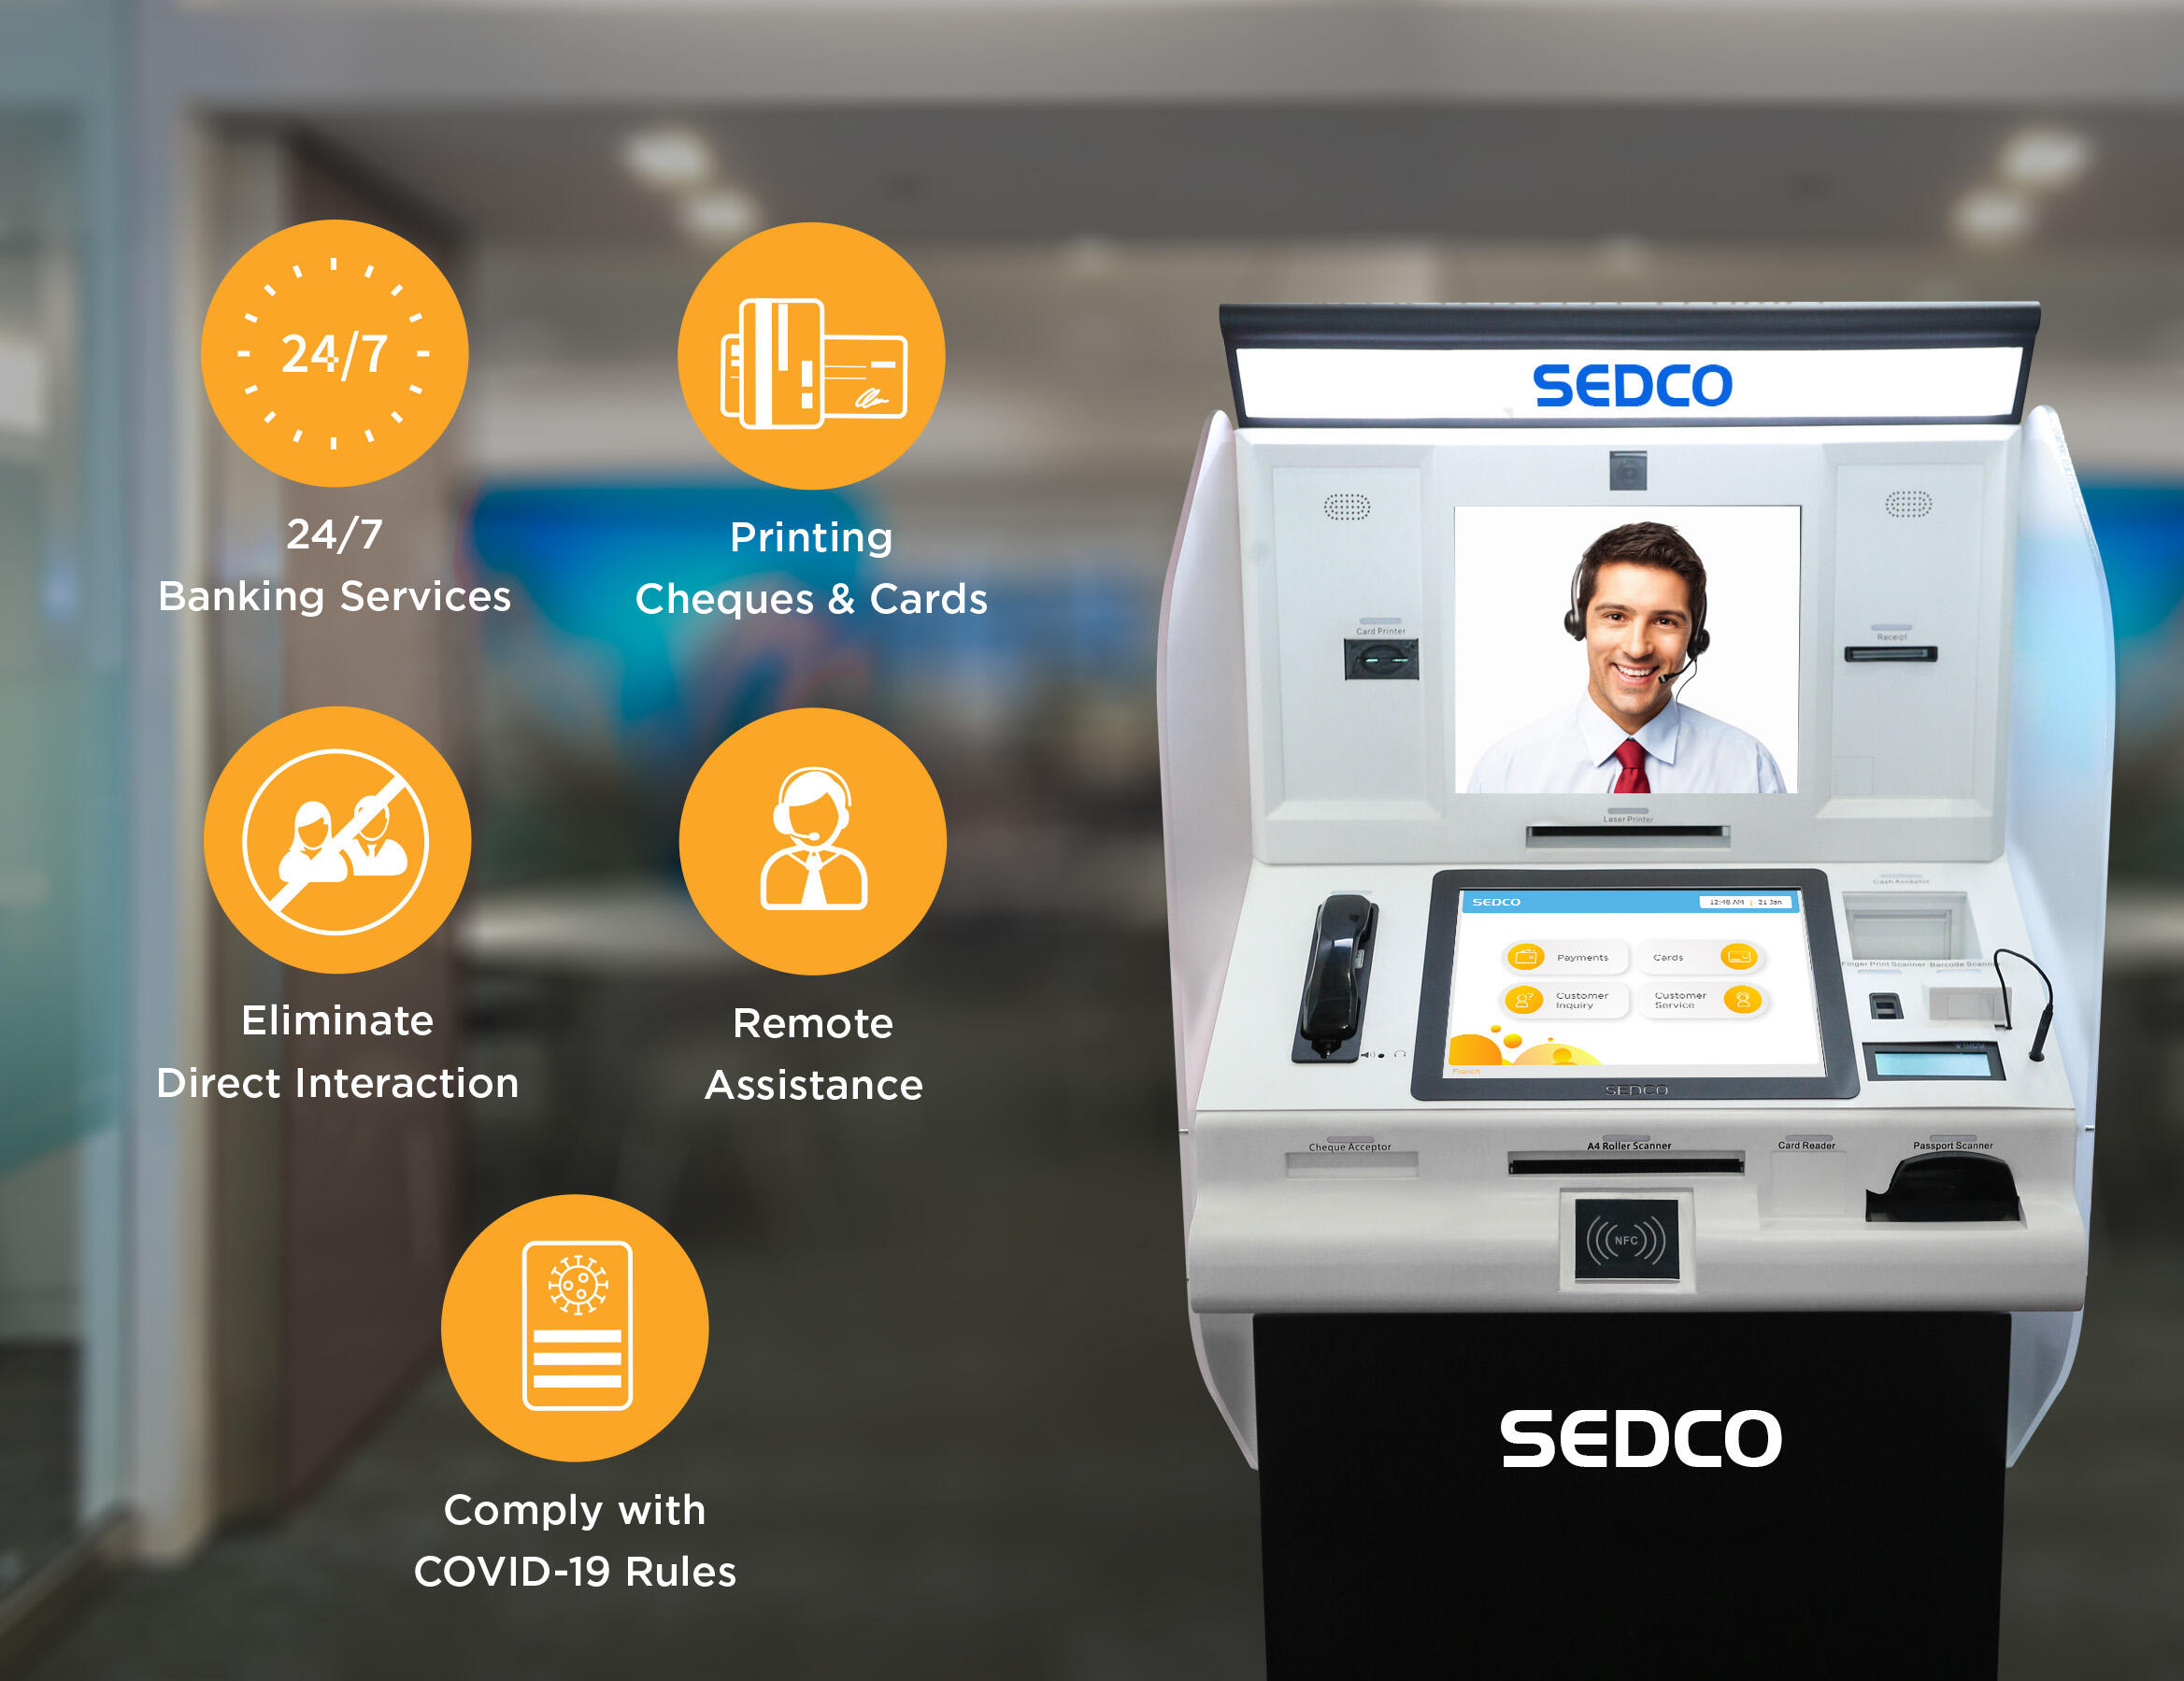 Banks adopting SEDCO's self-service machines to maintain social distancing